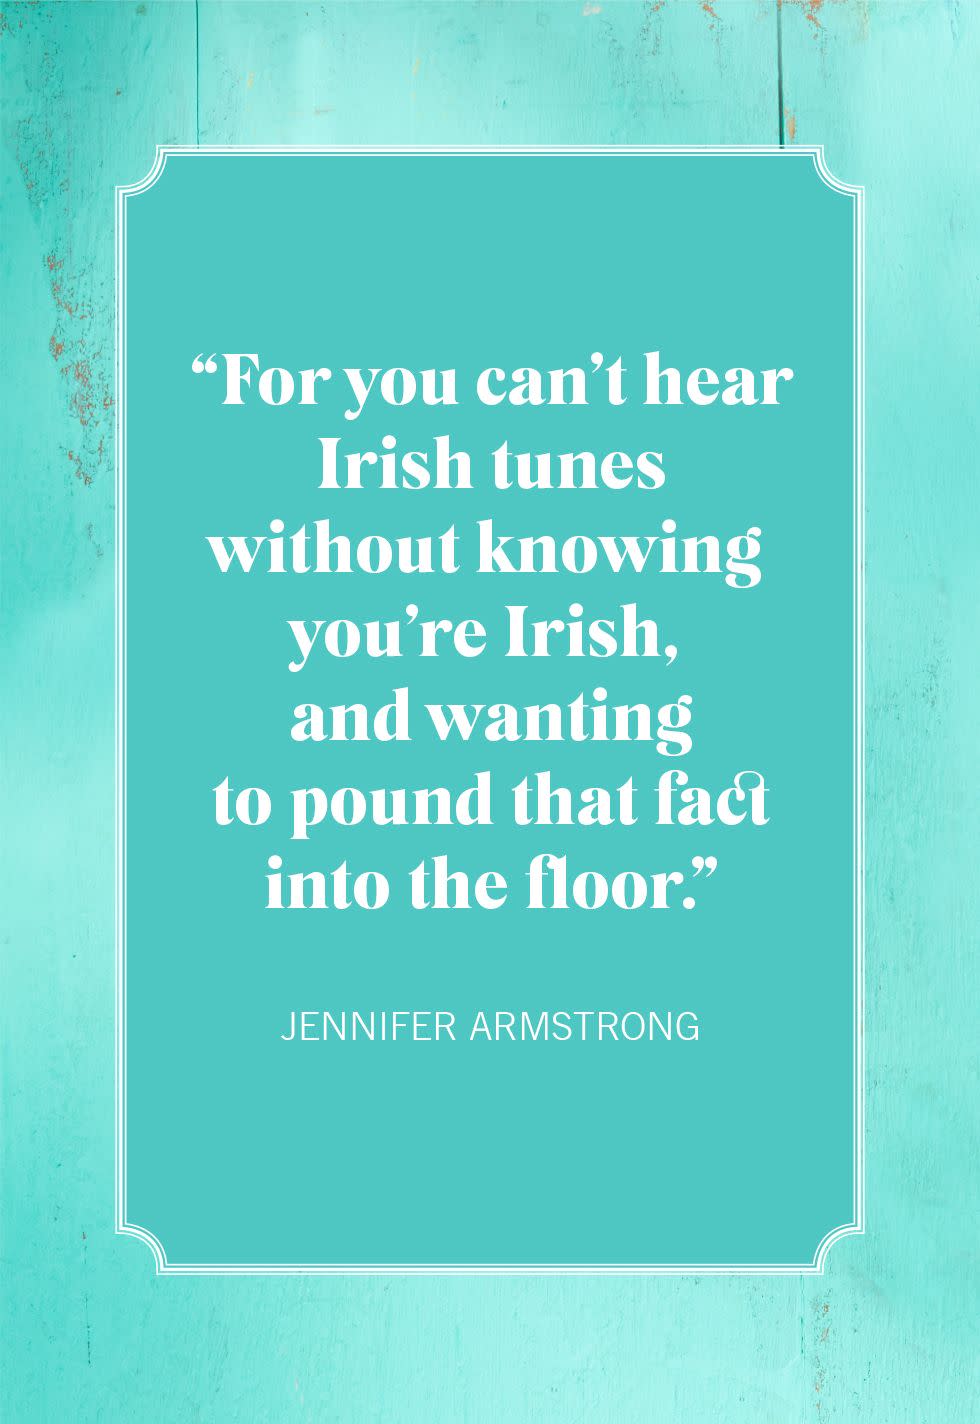 st patricks day quotes armstrong